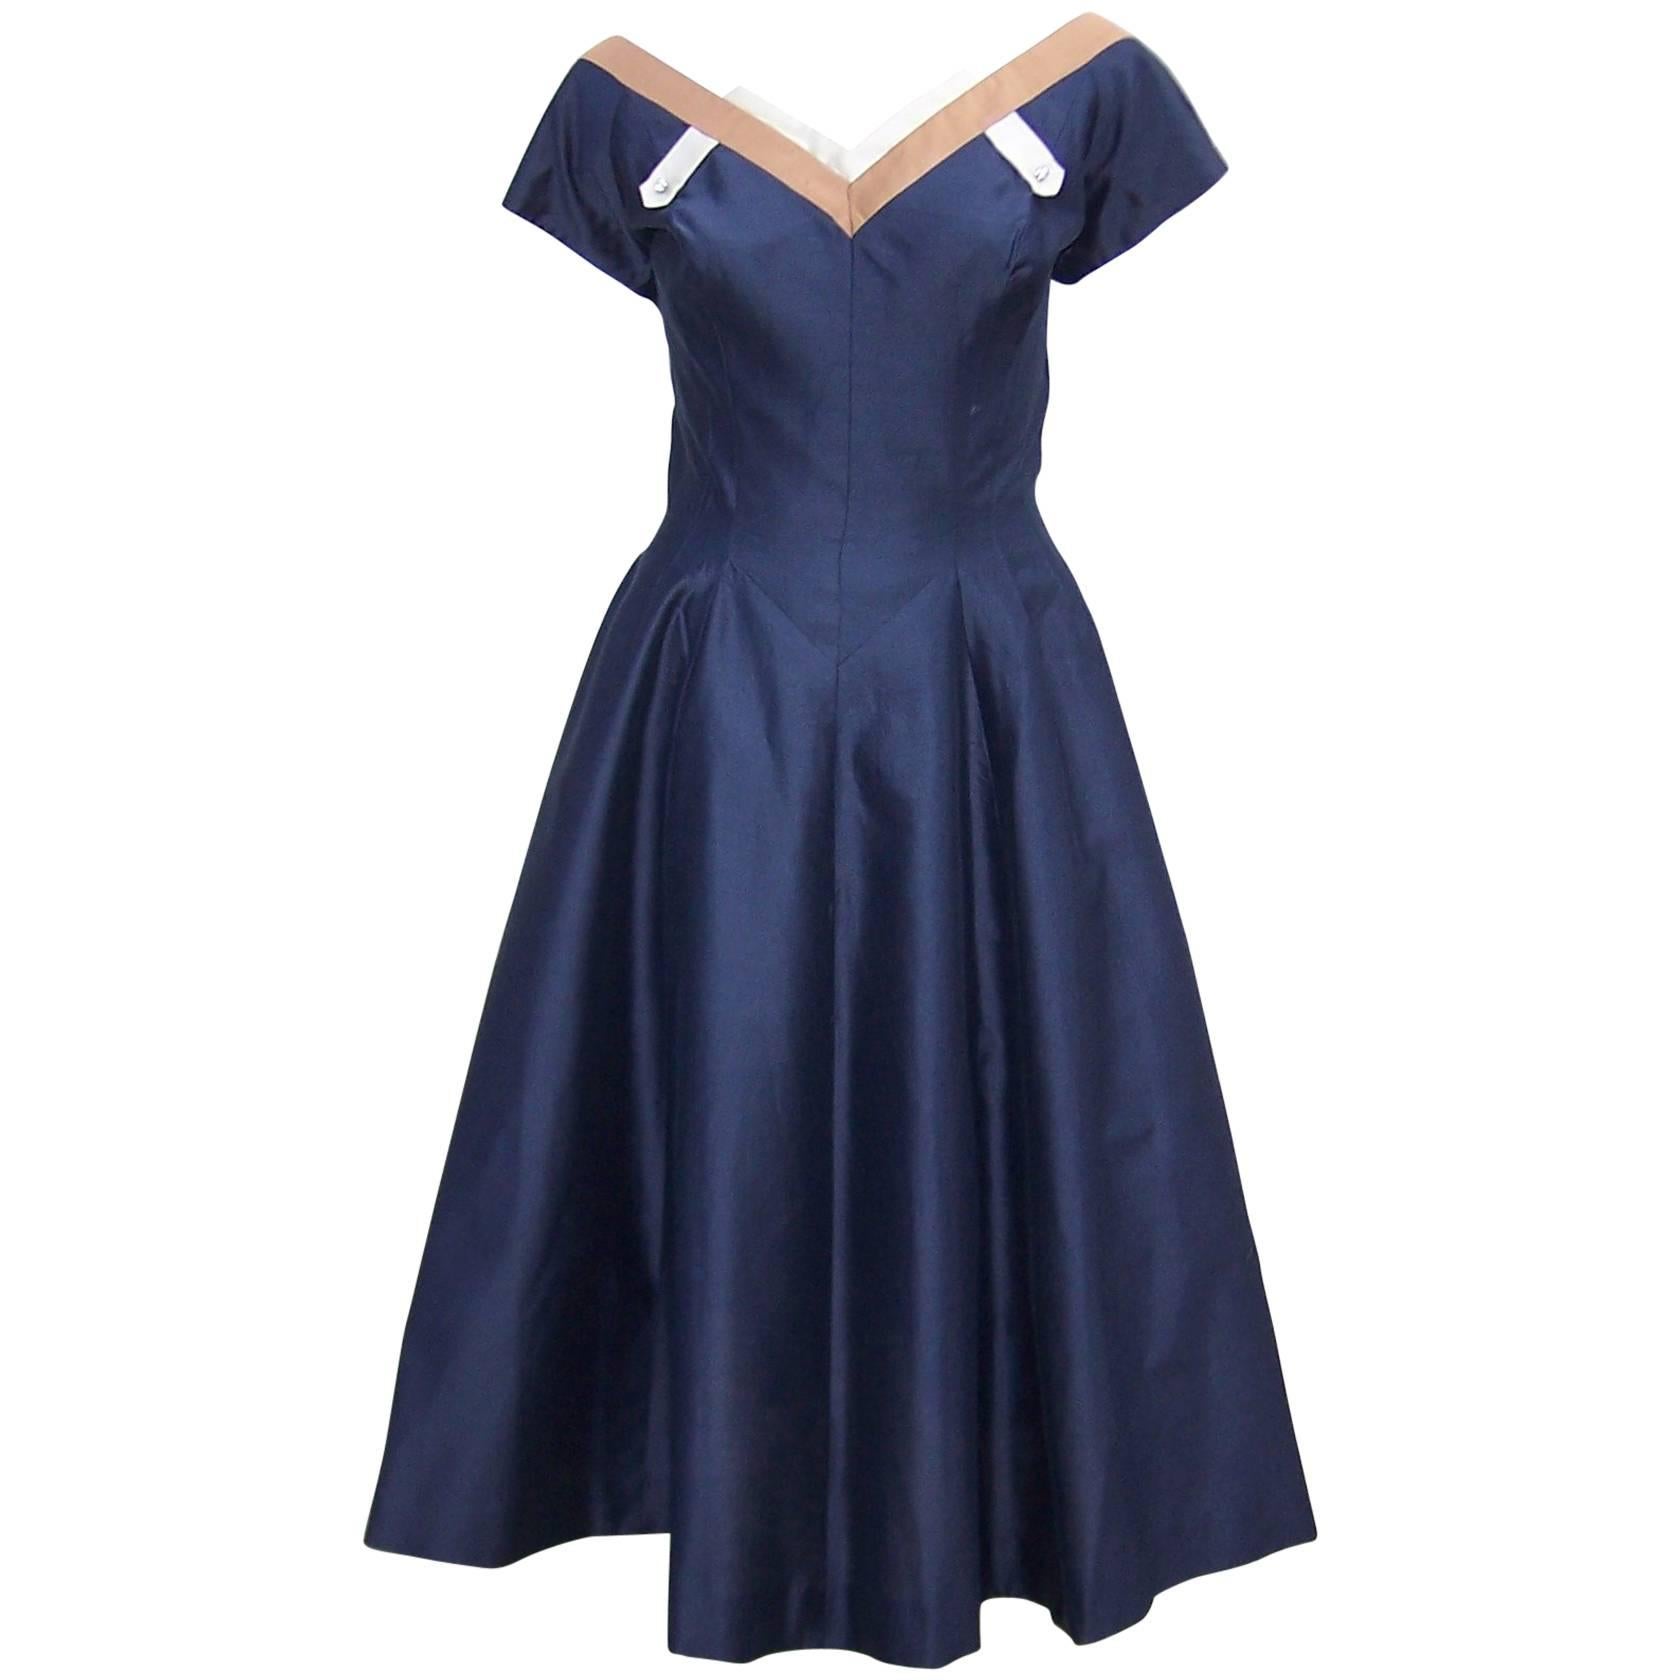 Classic 1950's Reich Original Navy Blue Full Skirted Party Dress